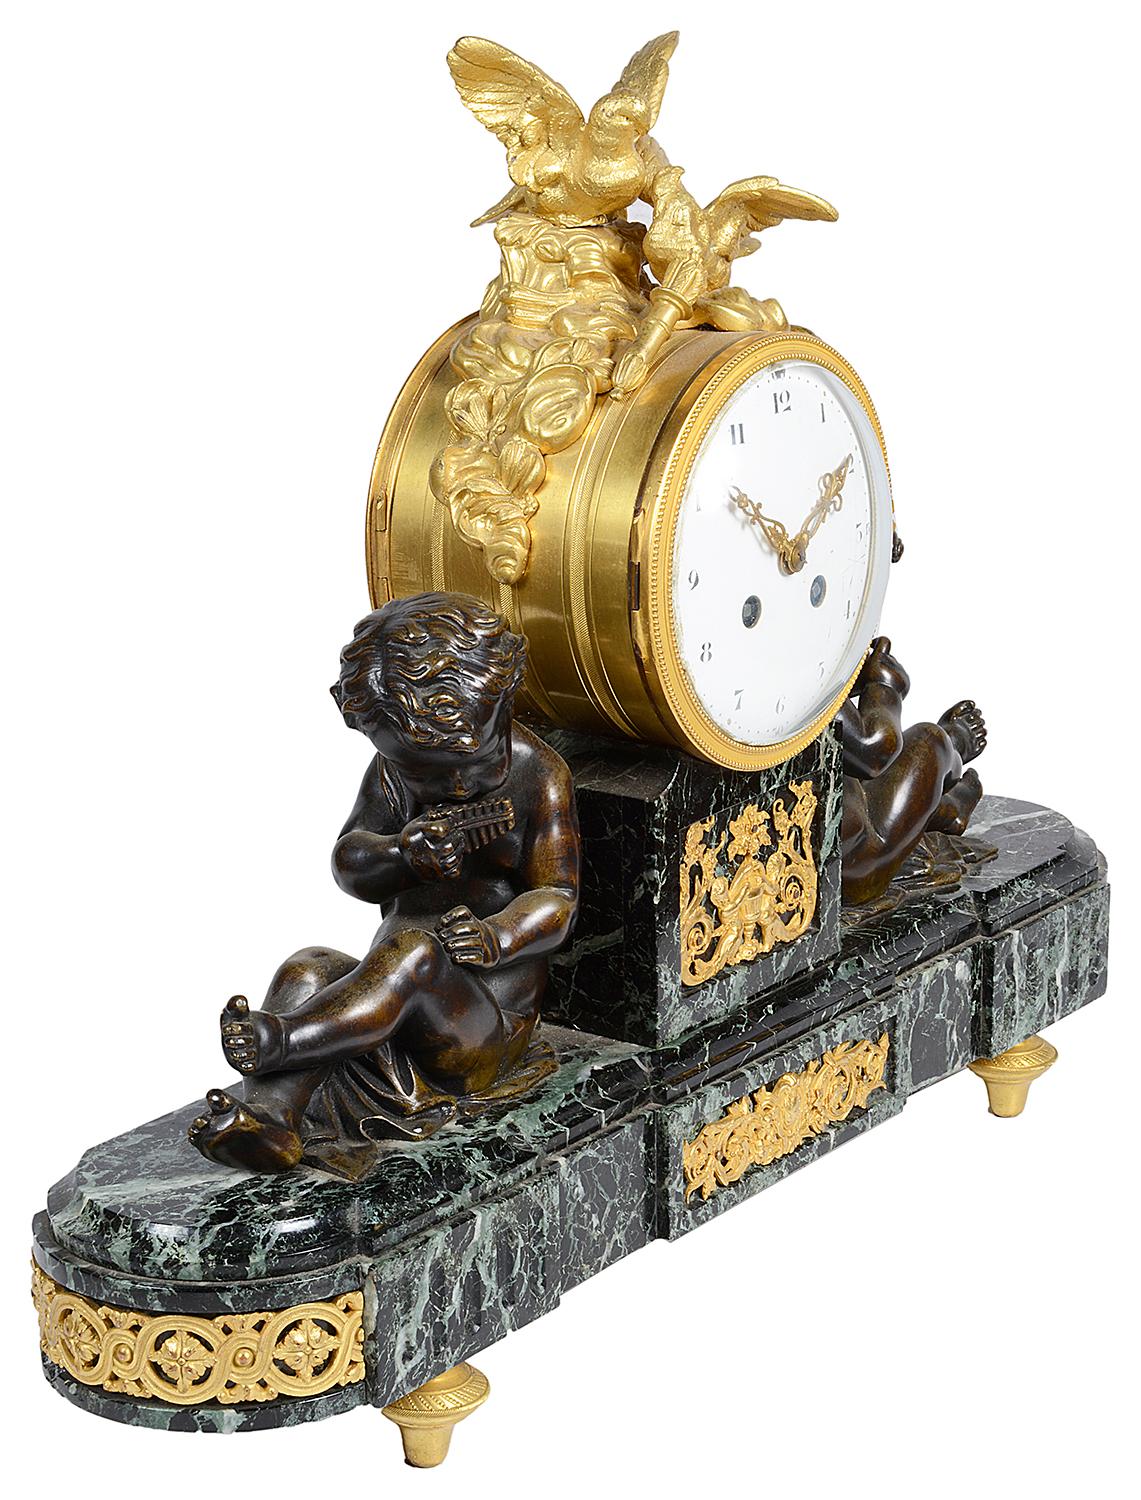 A good quality late 19th century French Louis XVI style mantel clock, having a pair of bronze putti either side of the eight day duration, chiming clock, mounted by a pair of gilded ormolu Doves, raised on a green marble base and ormolu feet.